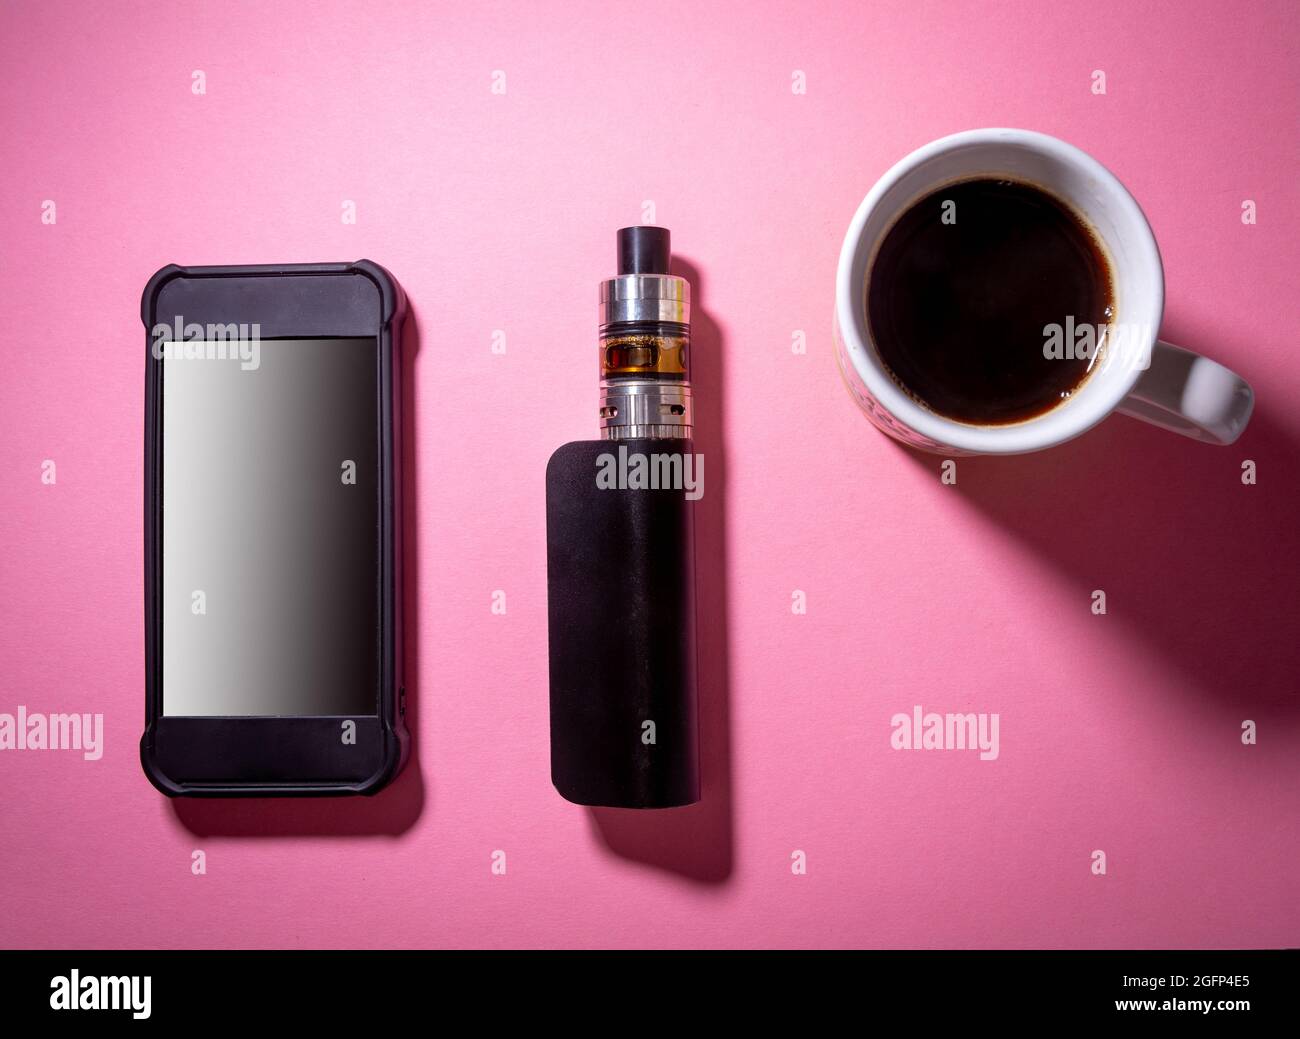 mobile phone ,electric cigarette and coffe on pink background ,concept of resting or taking a pause . Stock Photo